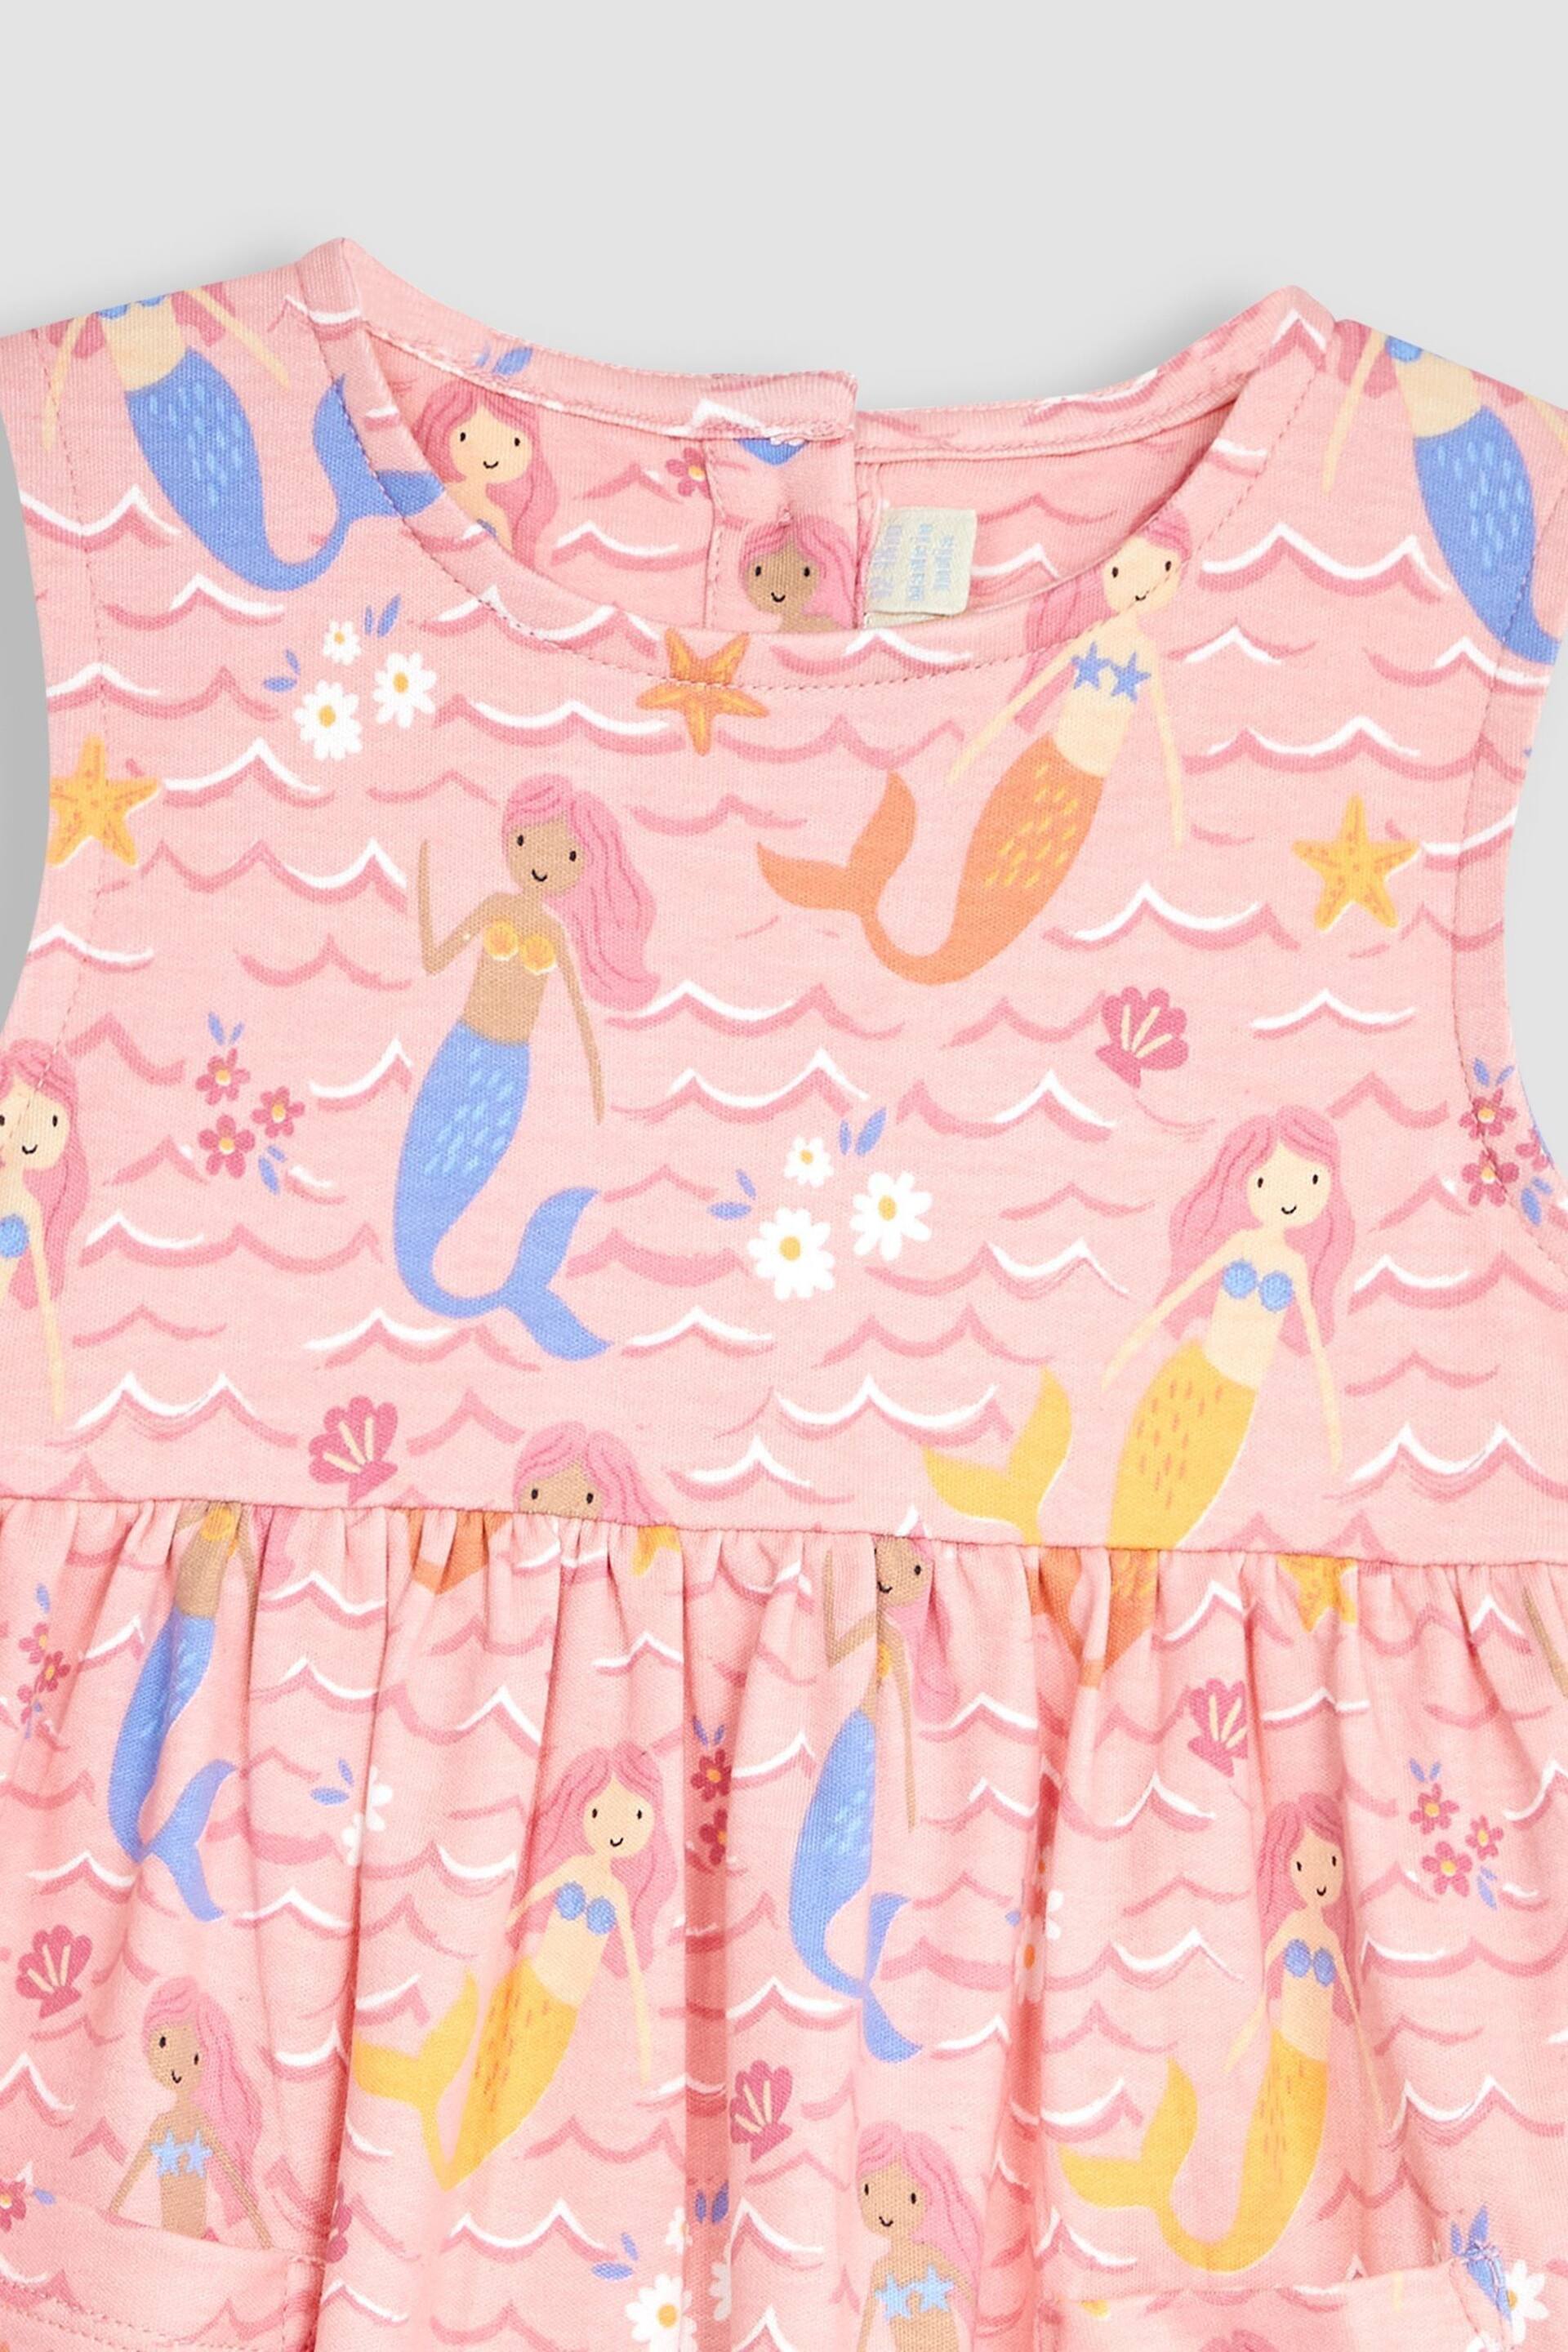 JoJo Maman Bébé Pale Pink Mermaid With Pet In Pocket Tiered Dress - Image 2 of 3